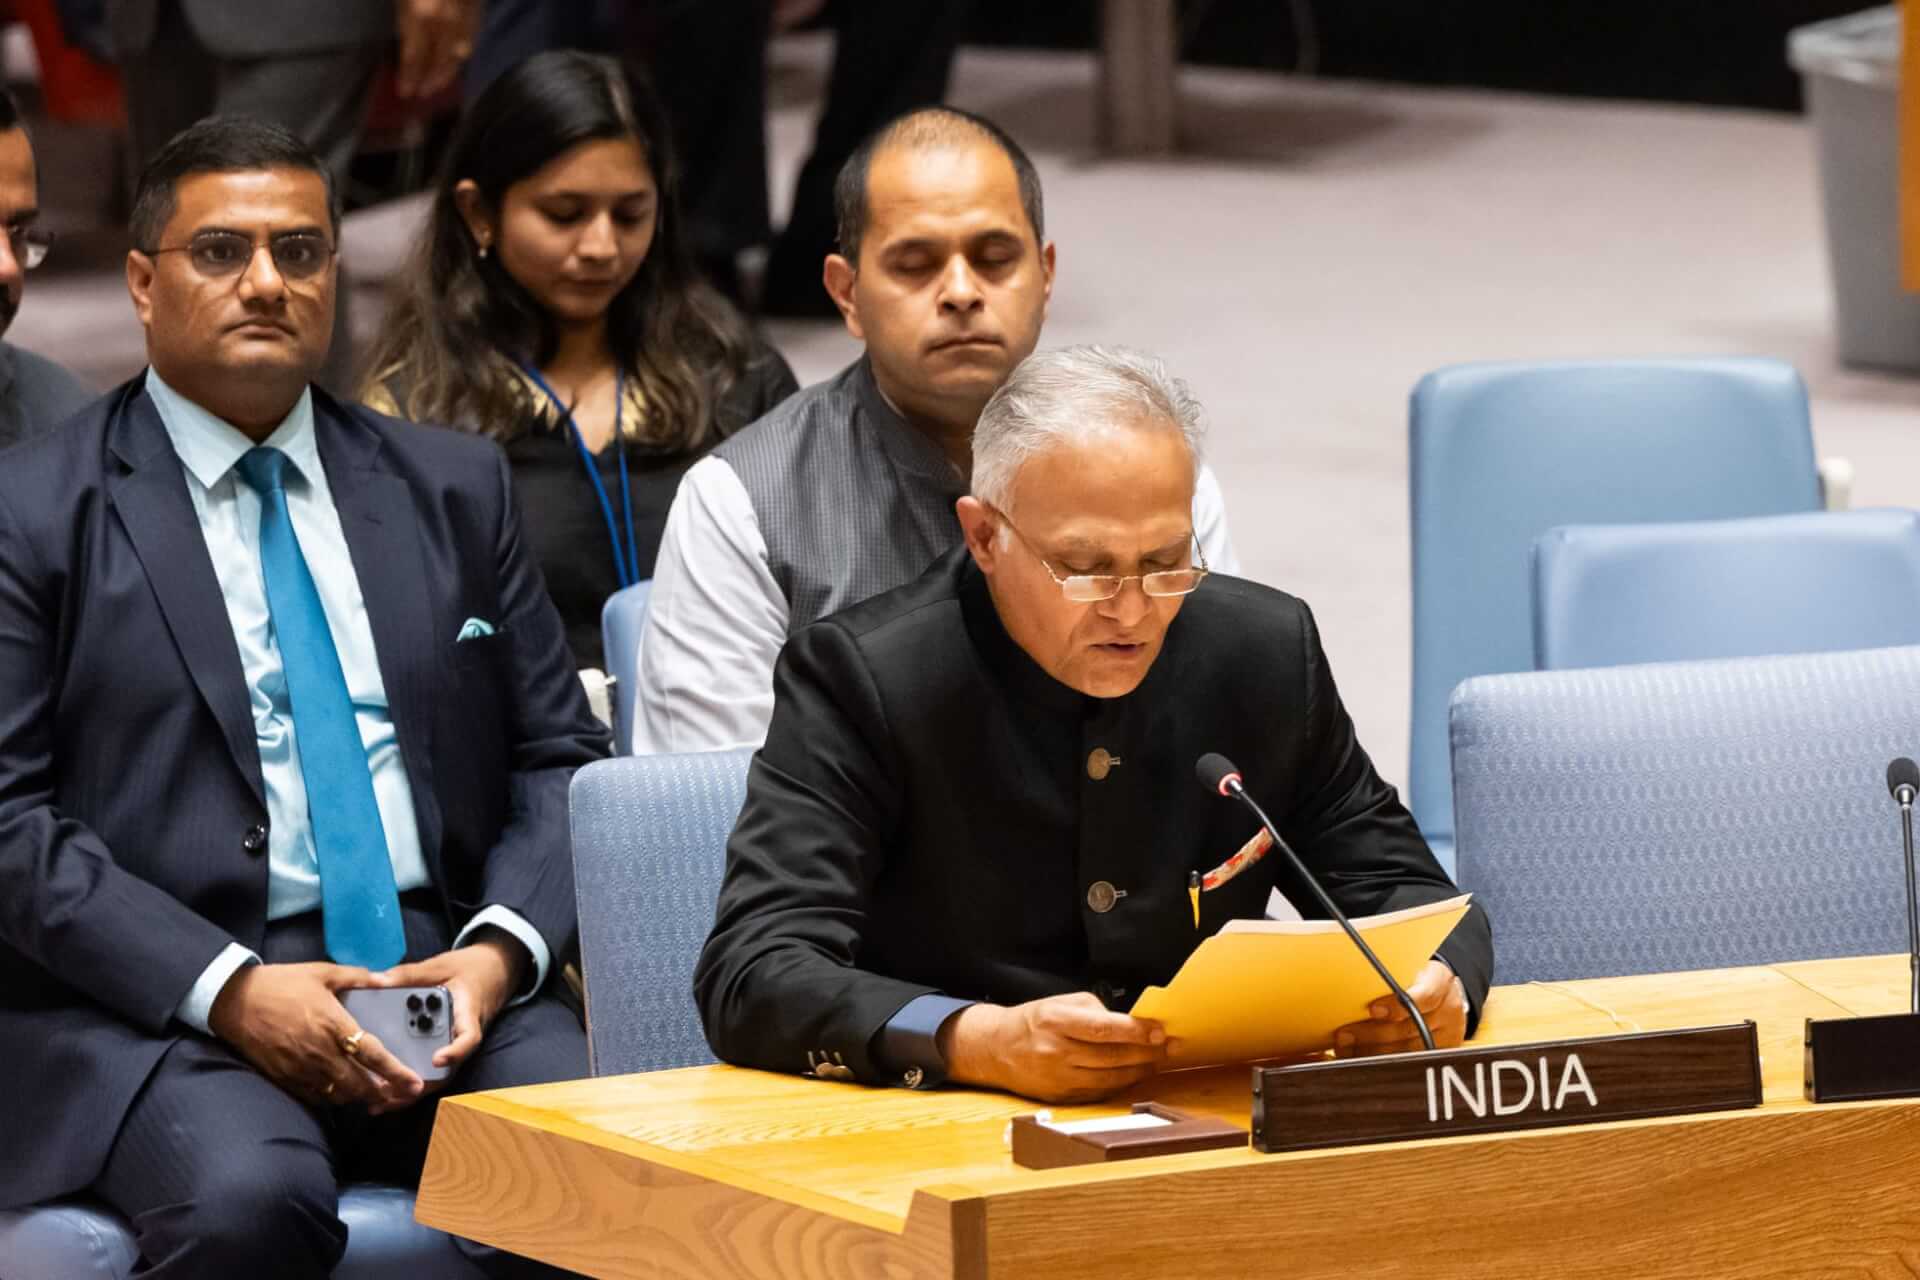 Why is UN “Completely Ineffective” in Resolving Russia-Ukraine Conflict?: India at Security Council Debate